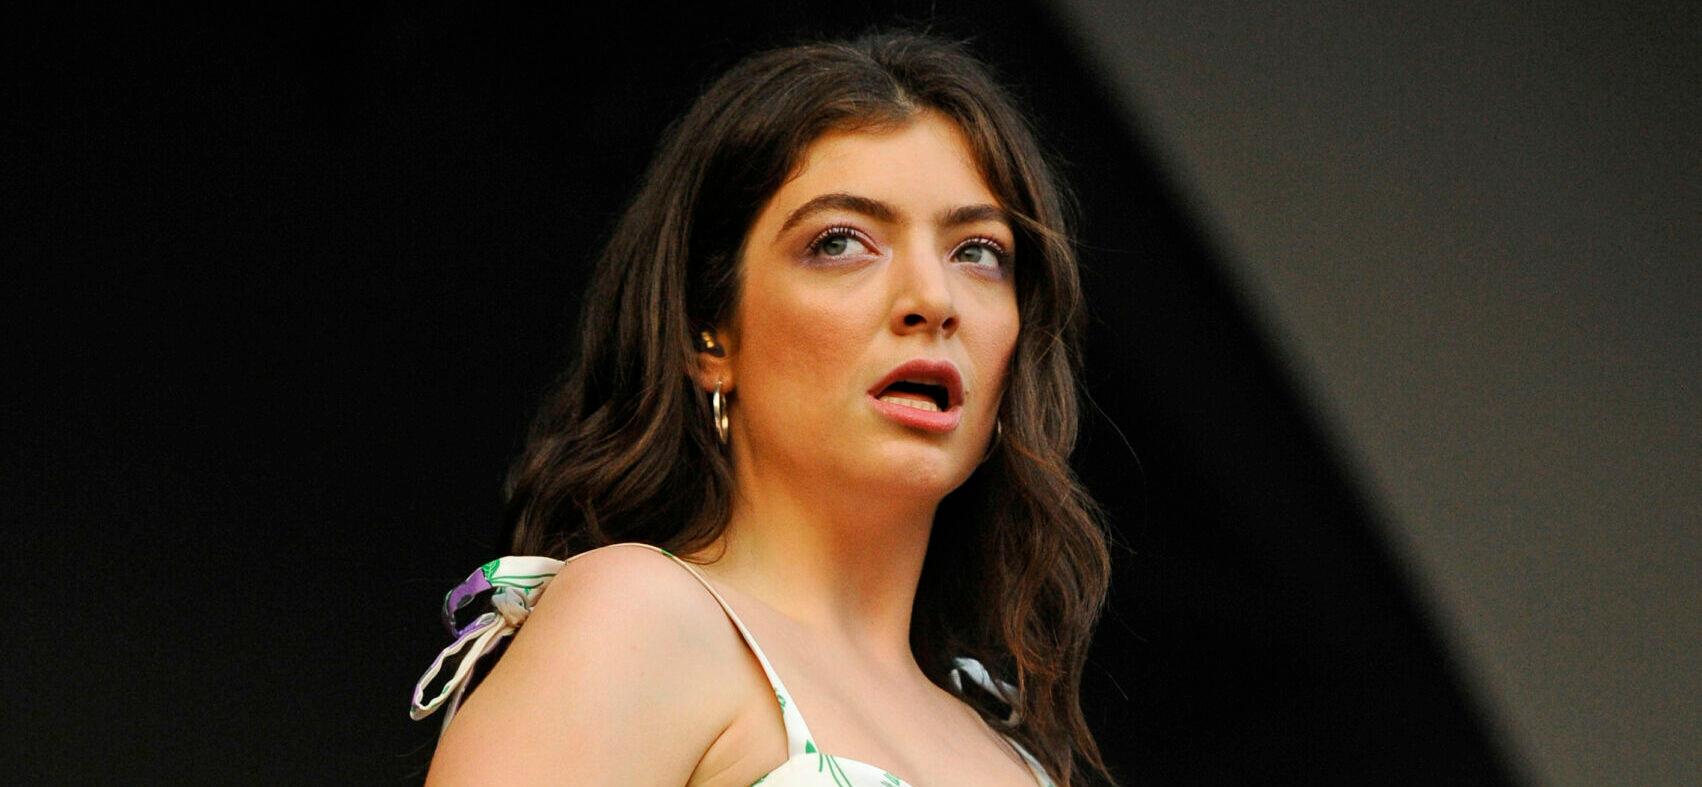 Lorde Reveals Her ‘Body Is Really Inflamed’ In Candid Health Update: ‘My Gut Isn’t Working Properly’